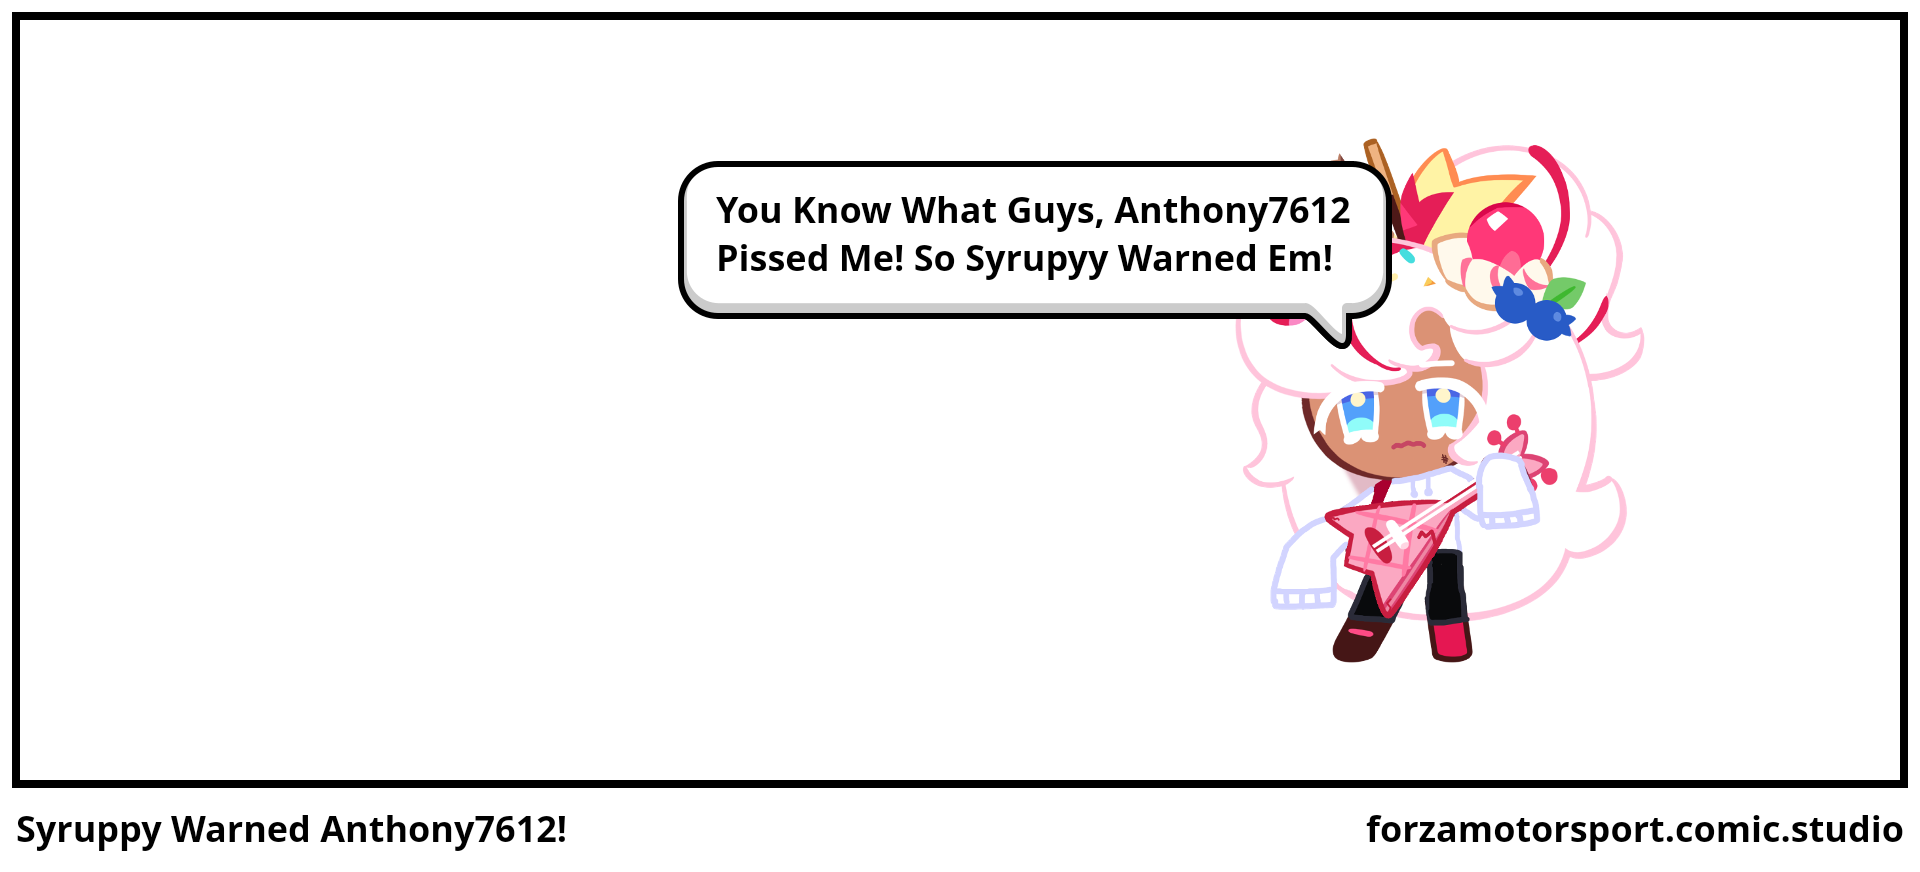 Syruppy Warned Anthony7612!